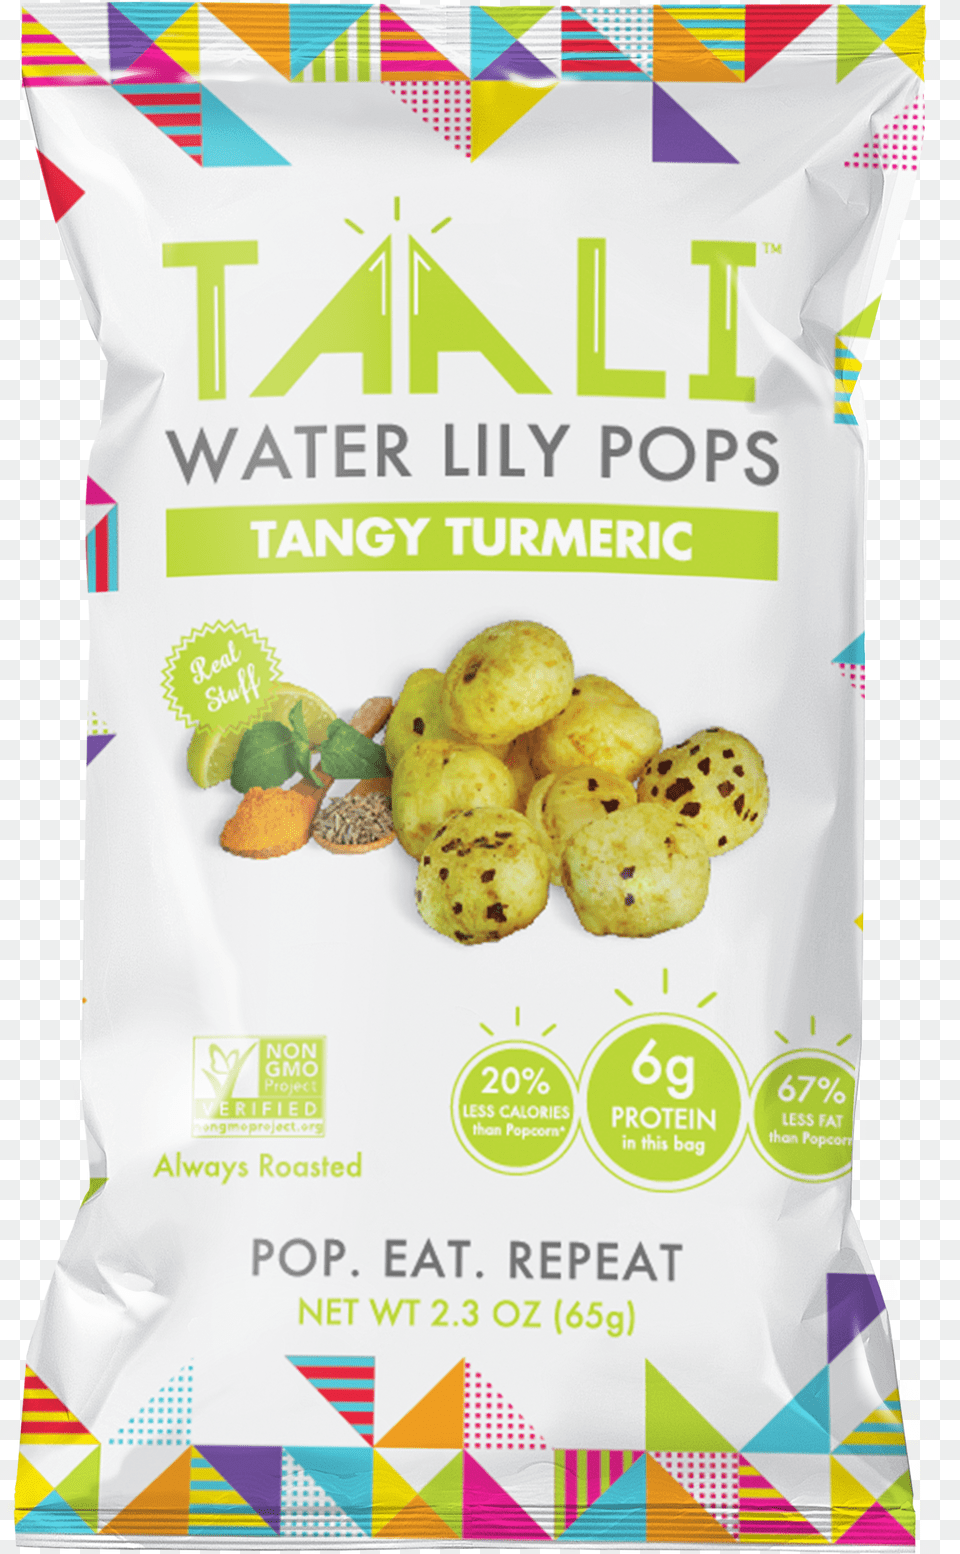 Tangy Turmeric Water Lily Pops Taali Water Lily Pops Png